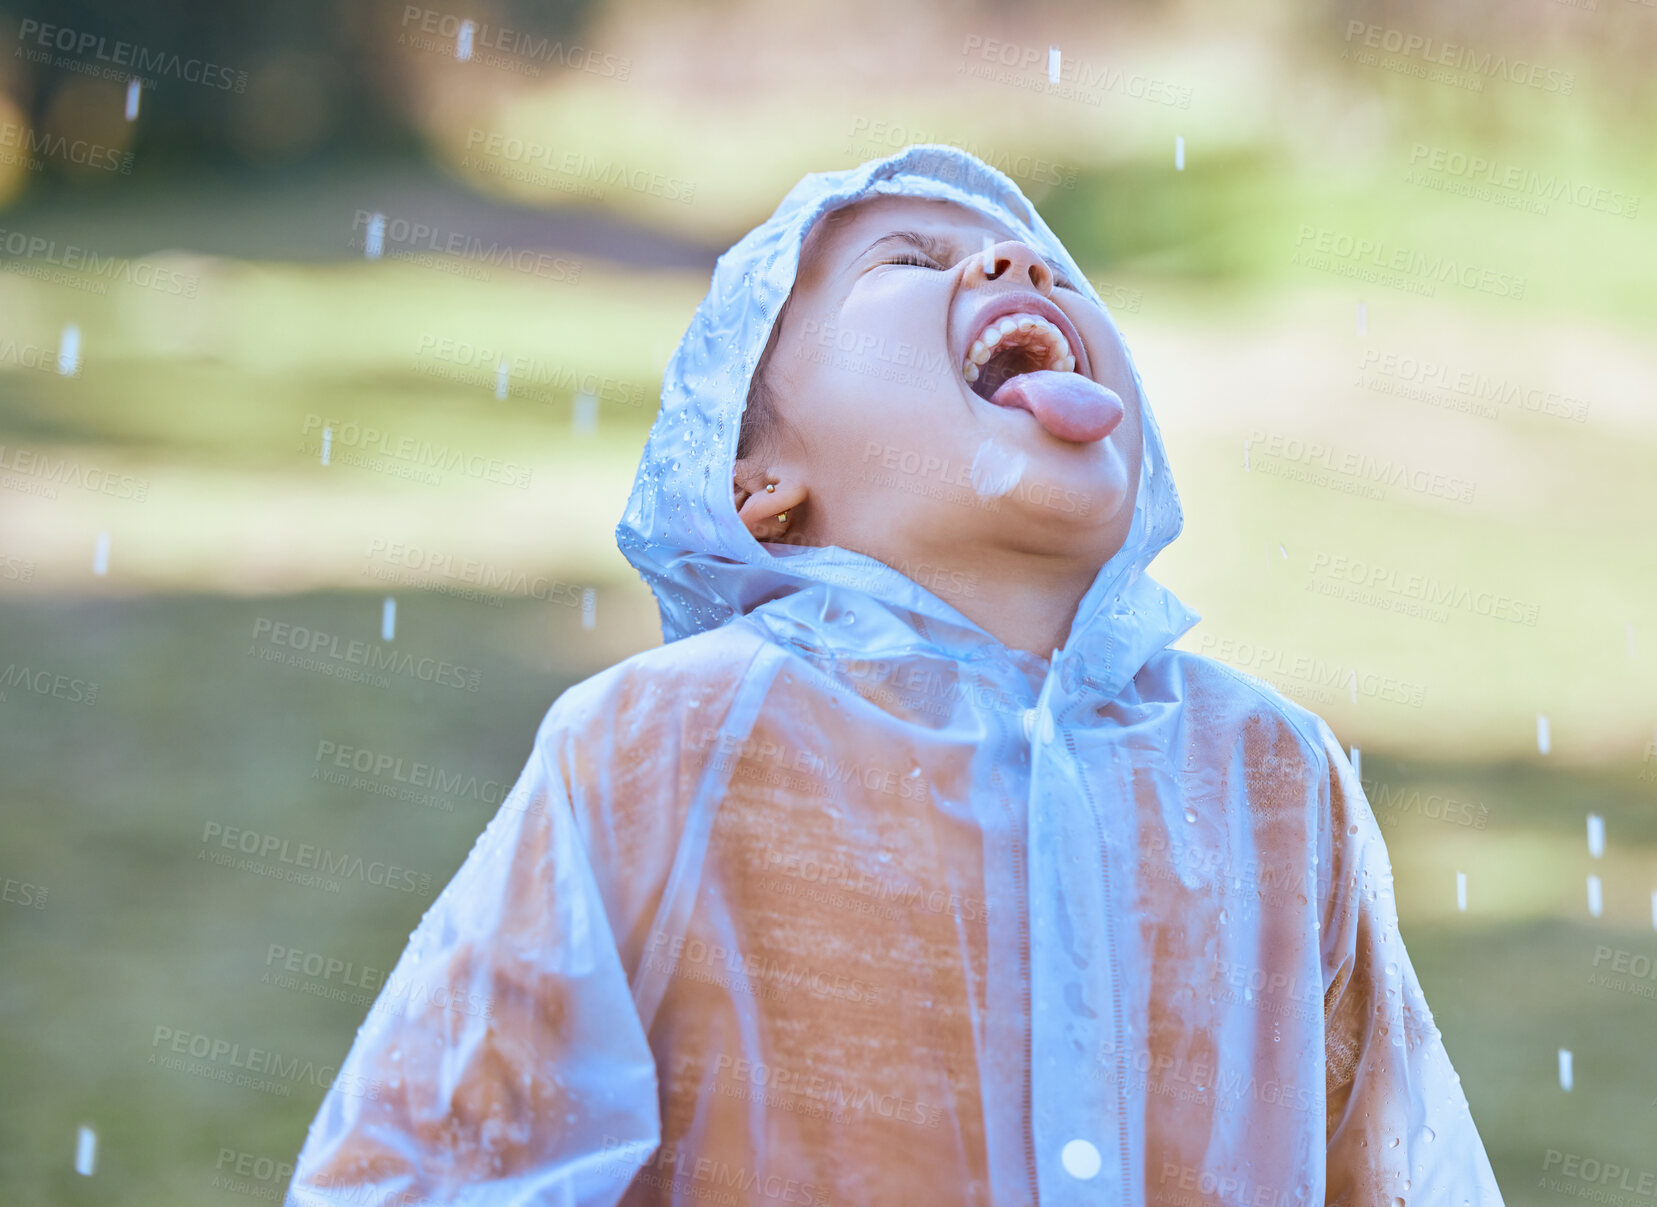 Buy stock photo Shot of a little girl sticking her tongue out to catch the rain drops in her mouth